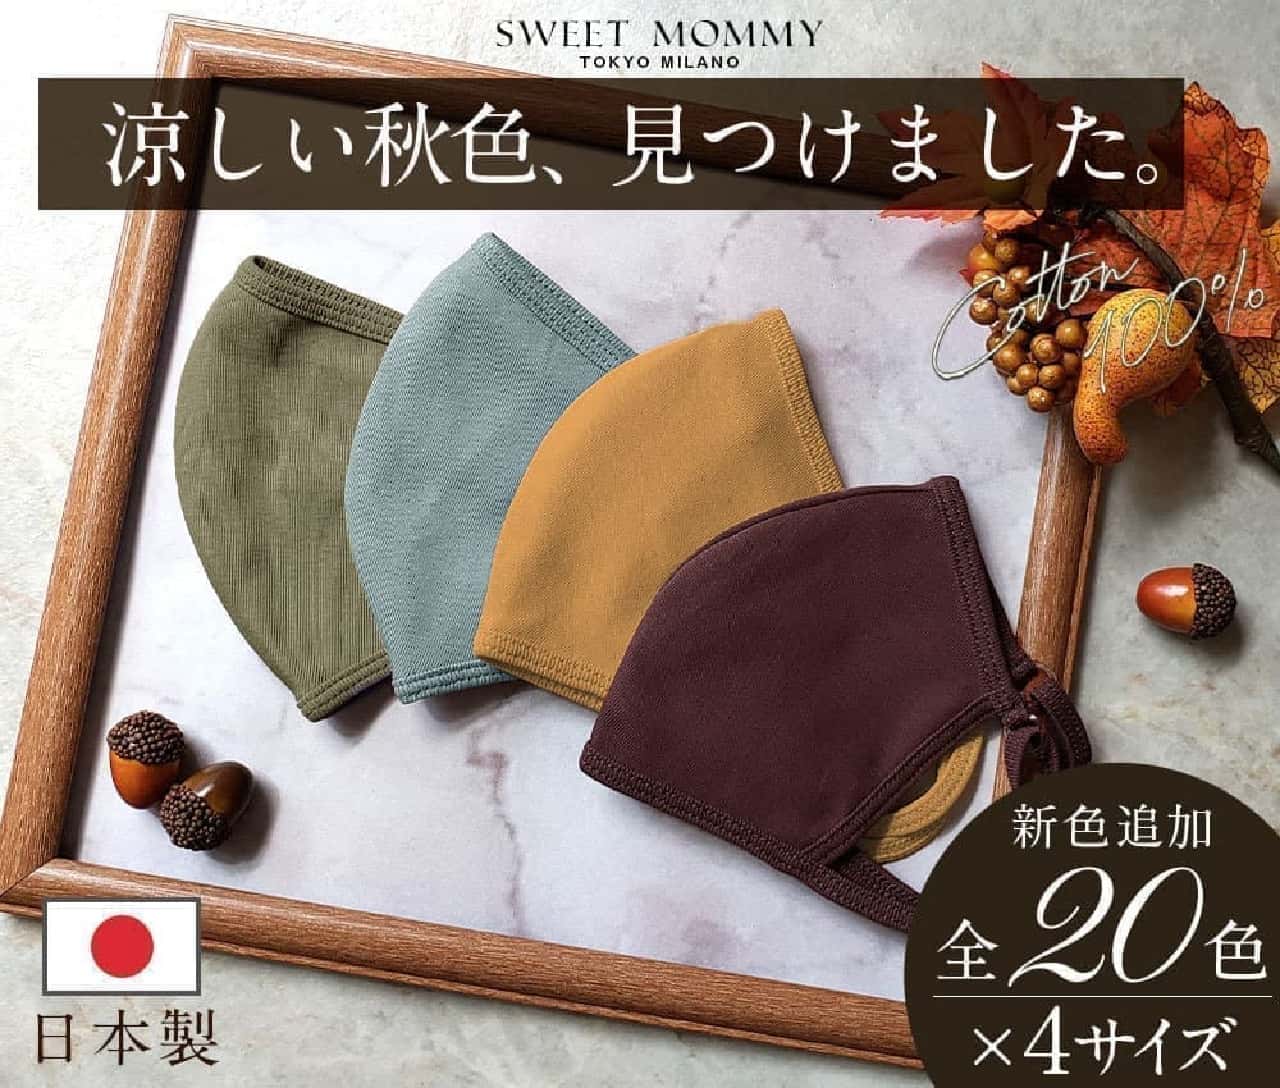 Chic autumn-colored "cool contact mask" from sweet mommy --Vitamin color and pastel color continue